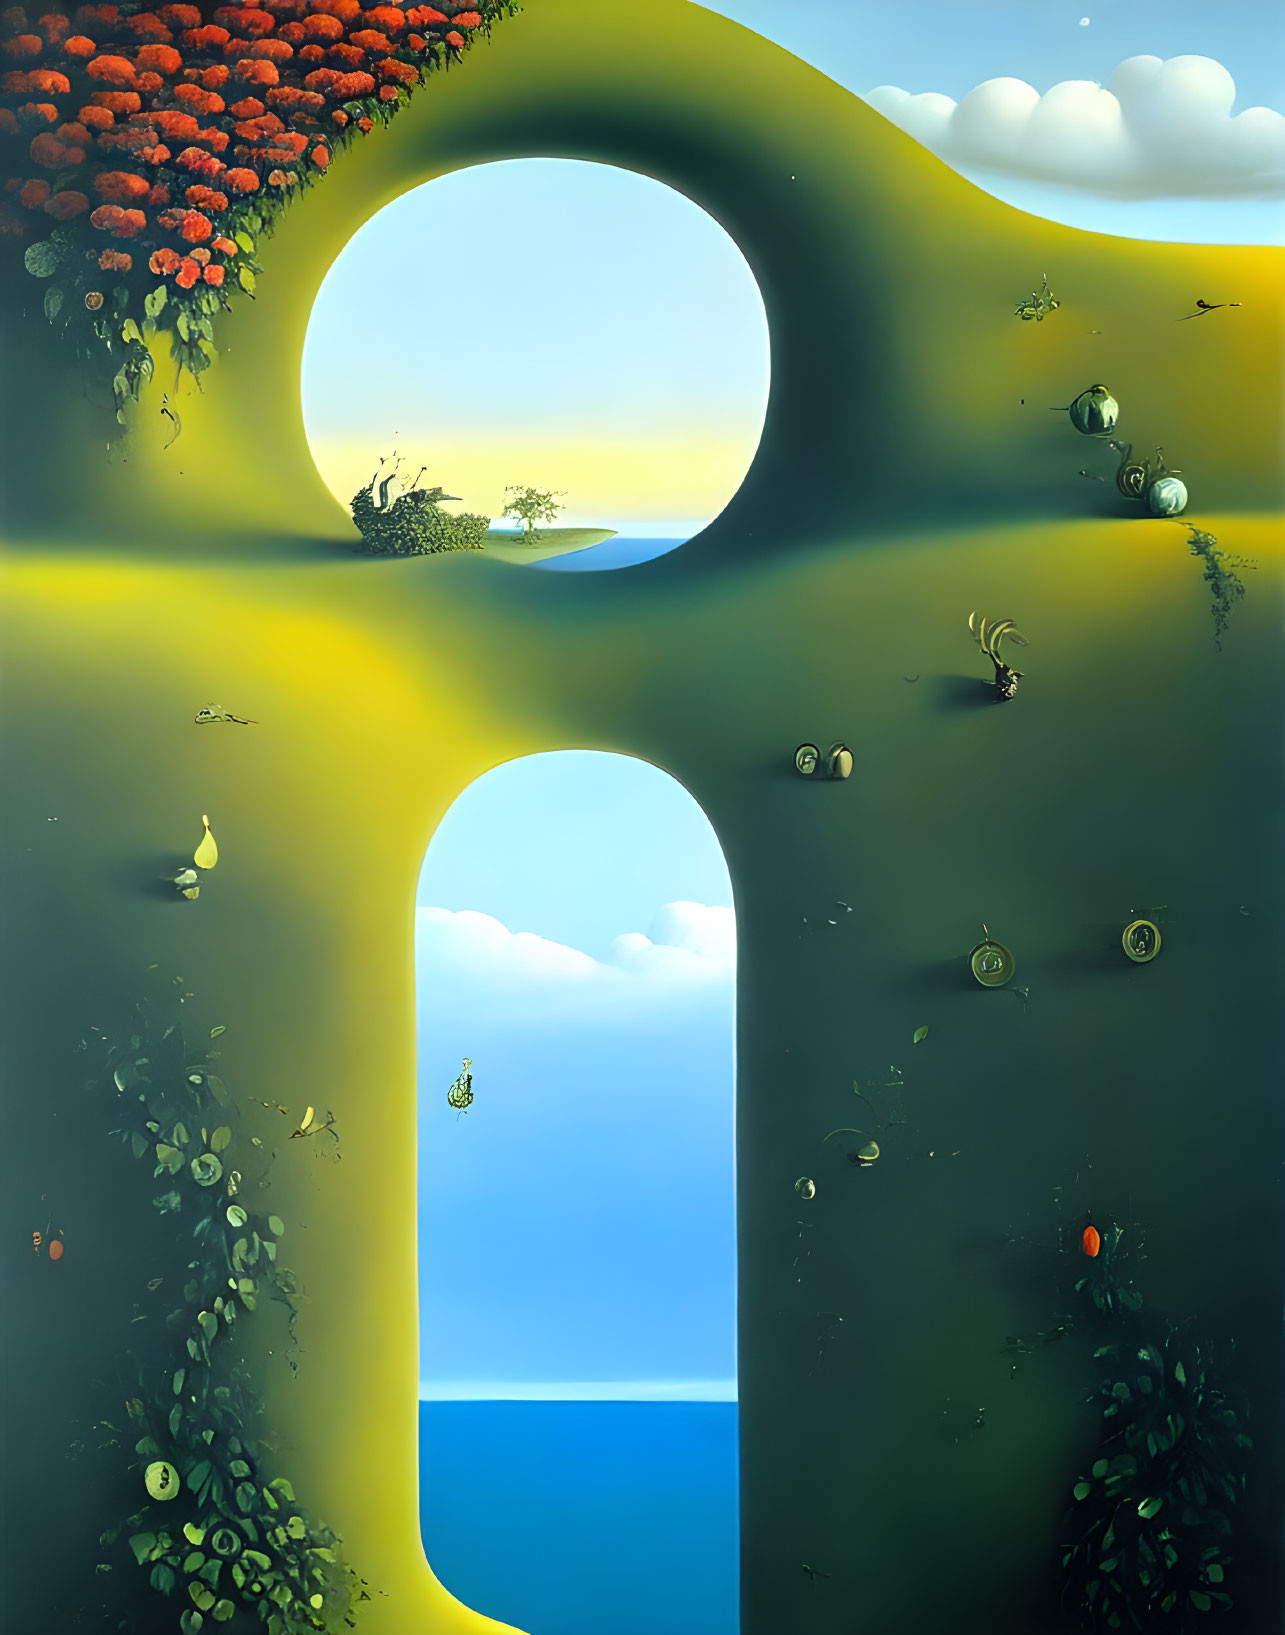 Surreal painting: Oversized letter "B" with natural landscapes and snails